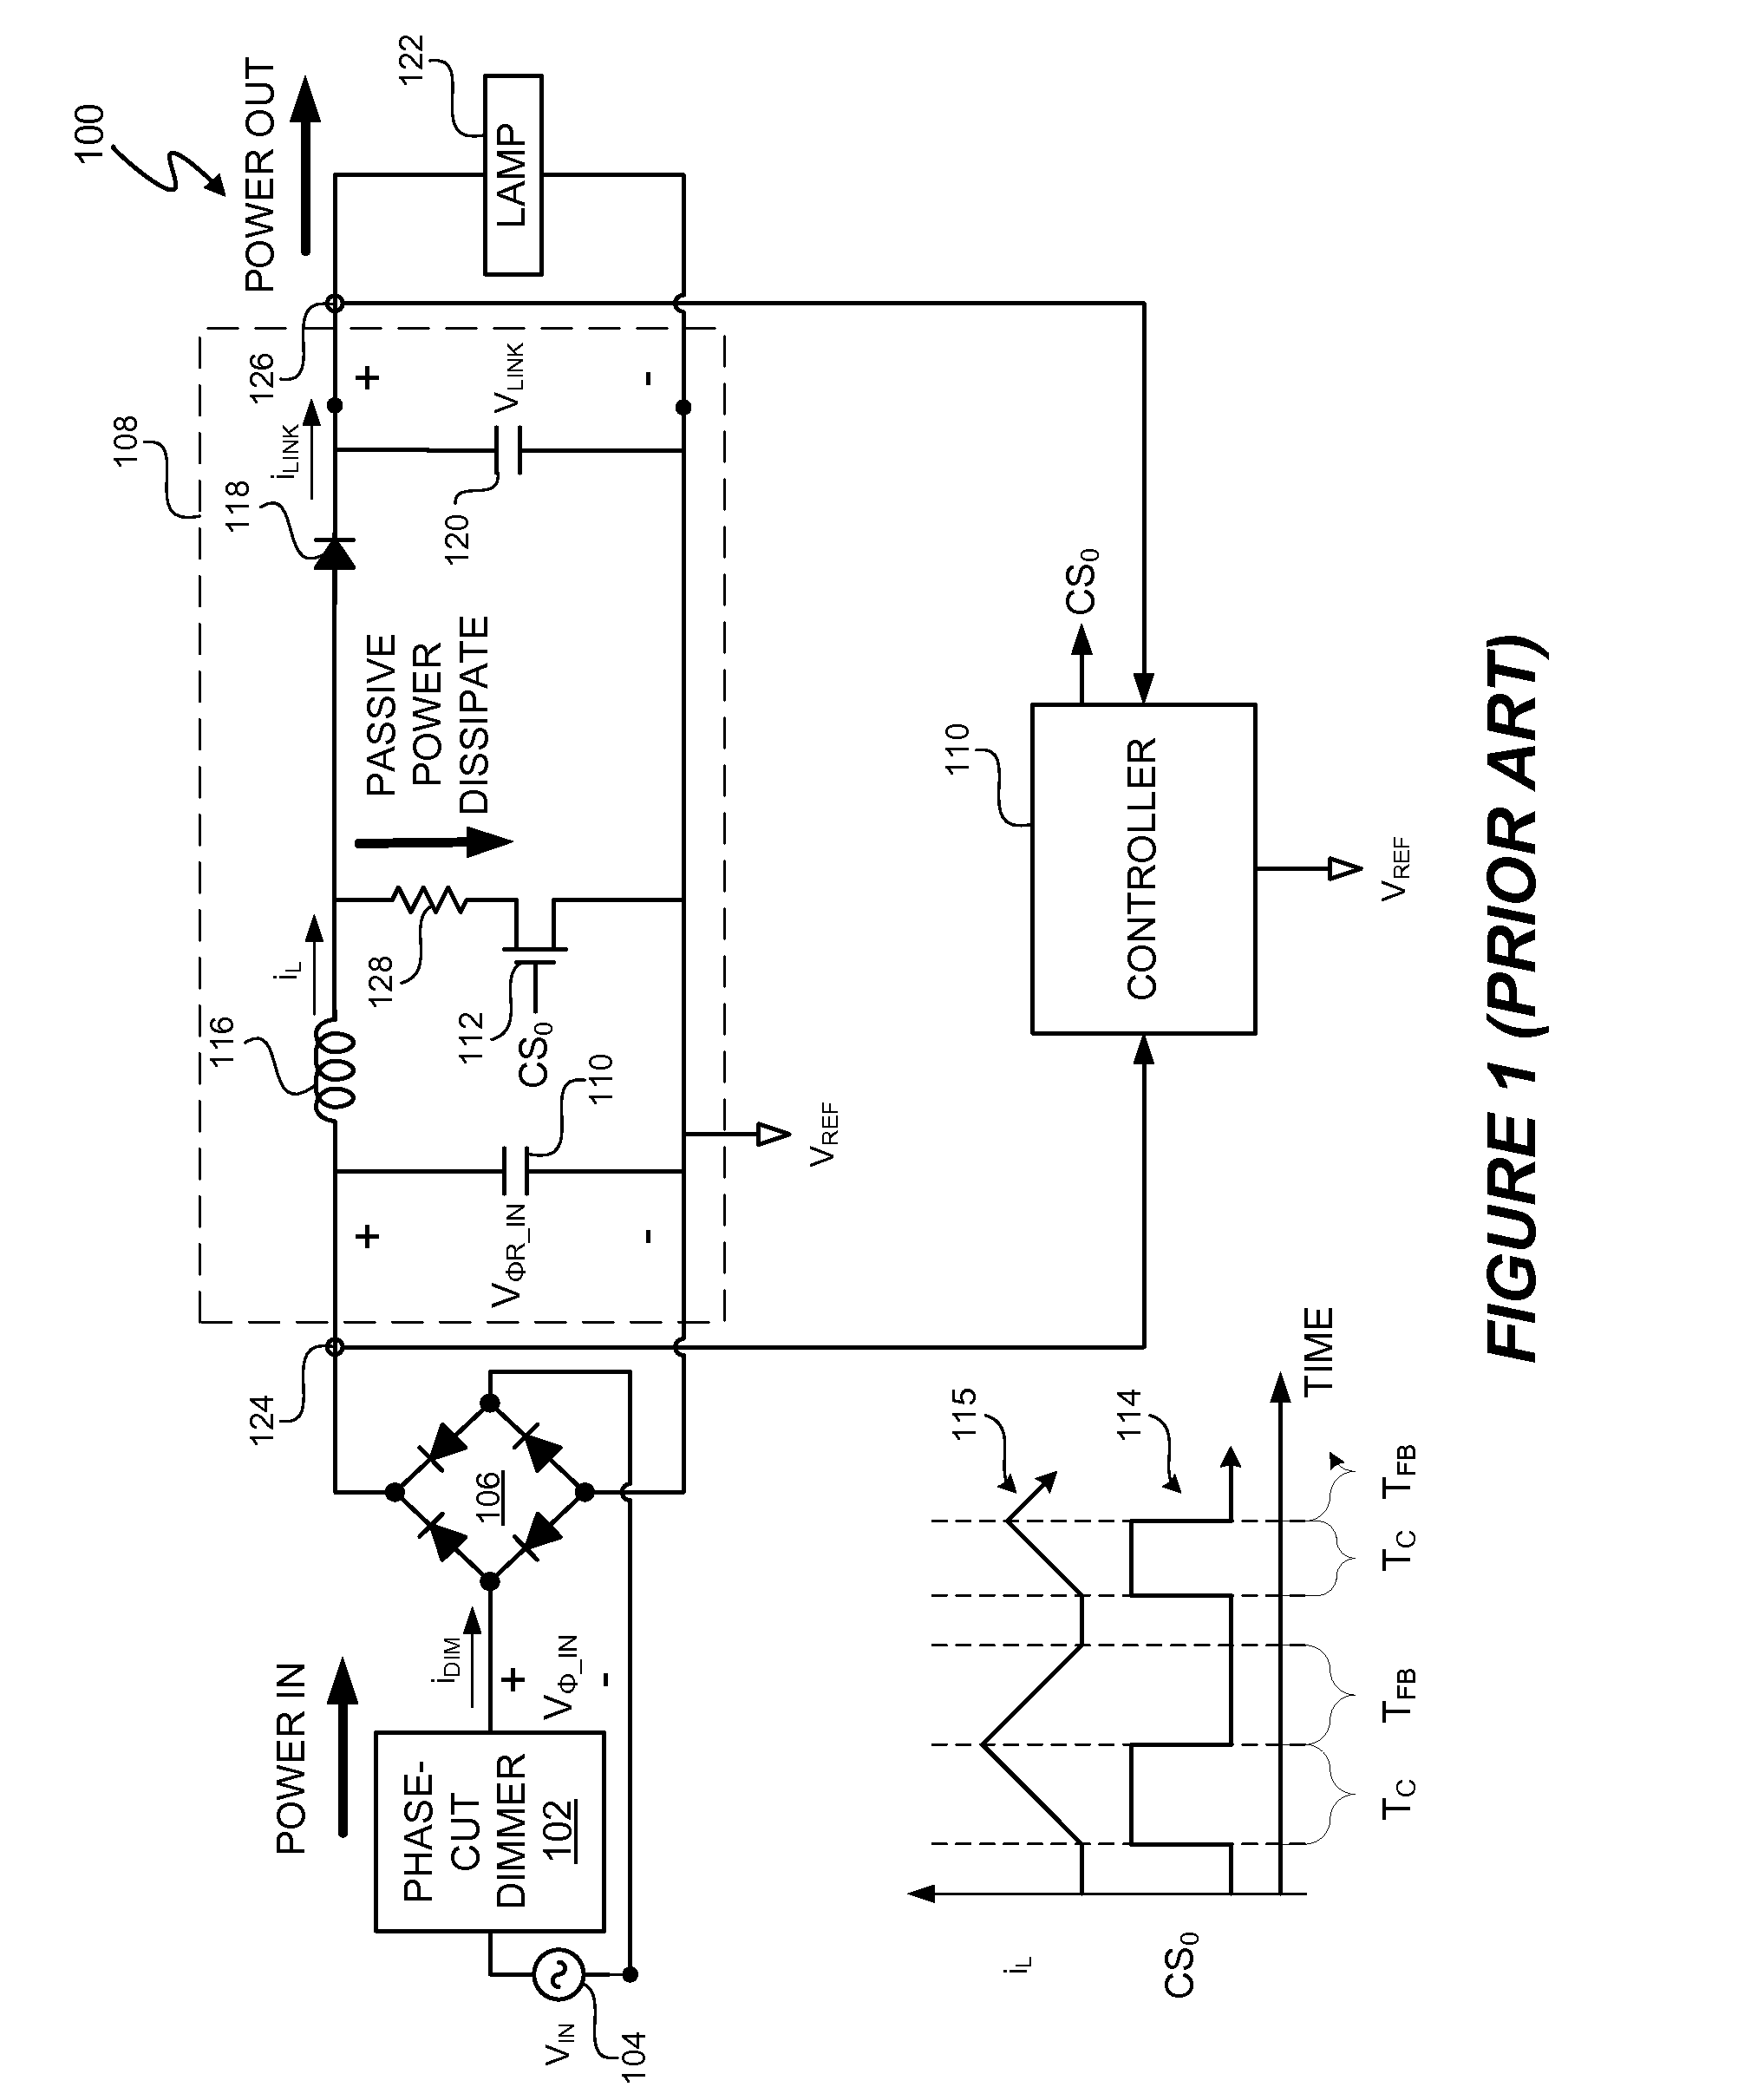 Controlled Power Dissipation In A Switch Path In A Lighting System